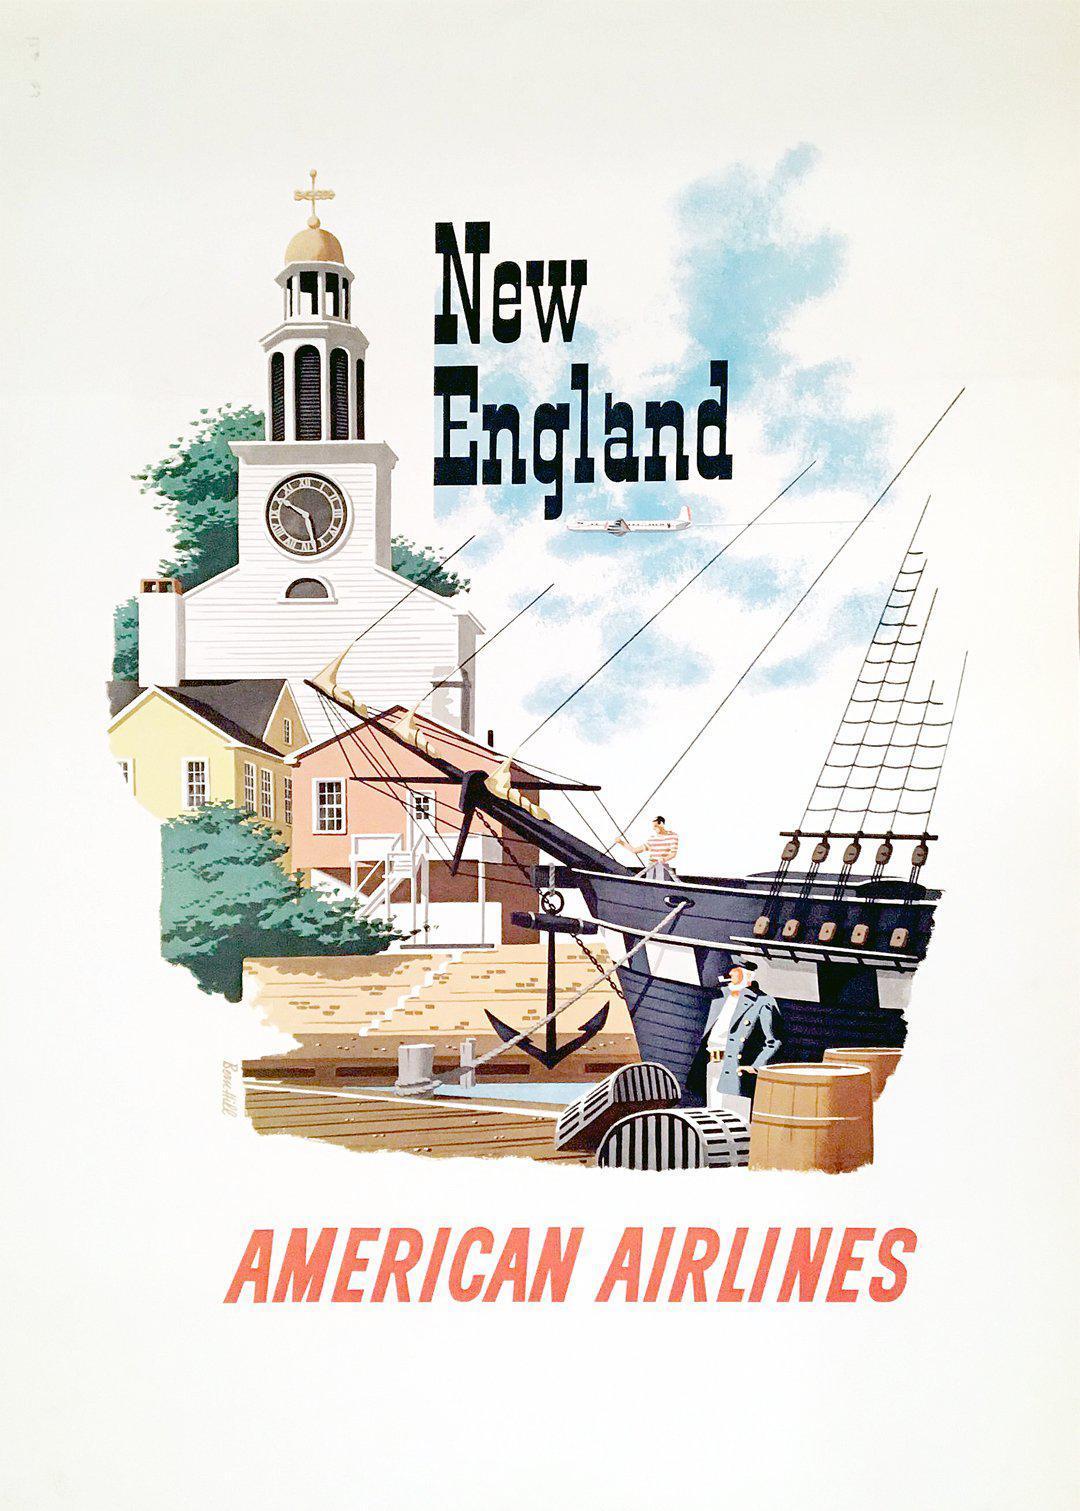 Original Vintage American Airlines Poster New England by Bern Hill c1955